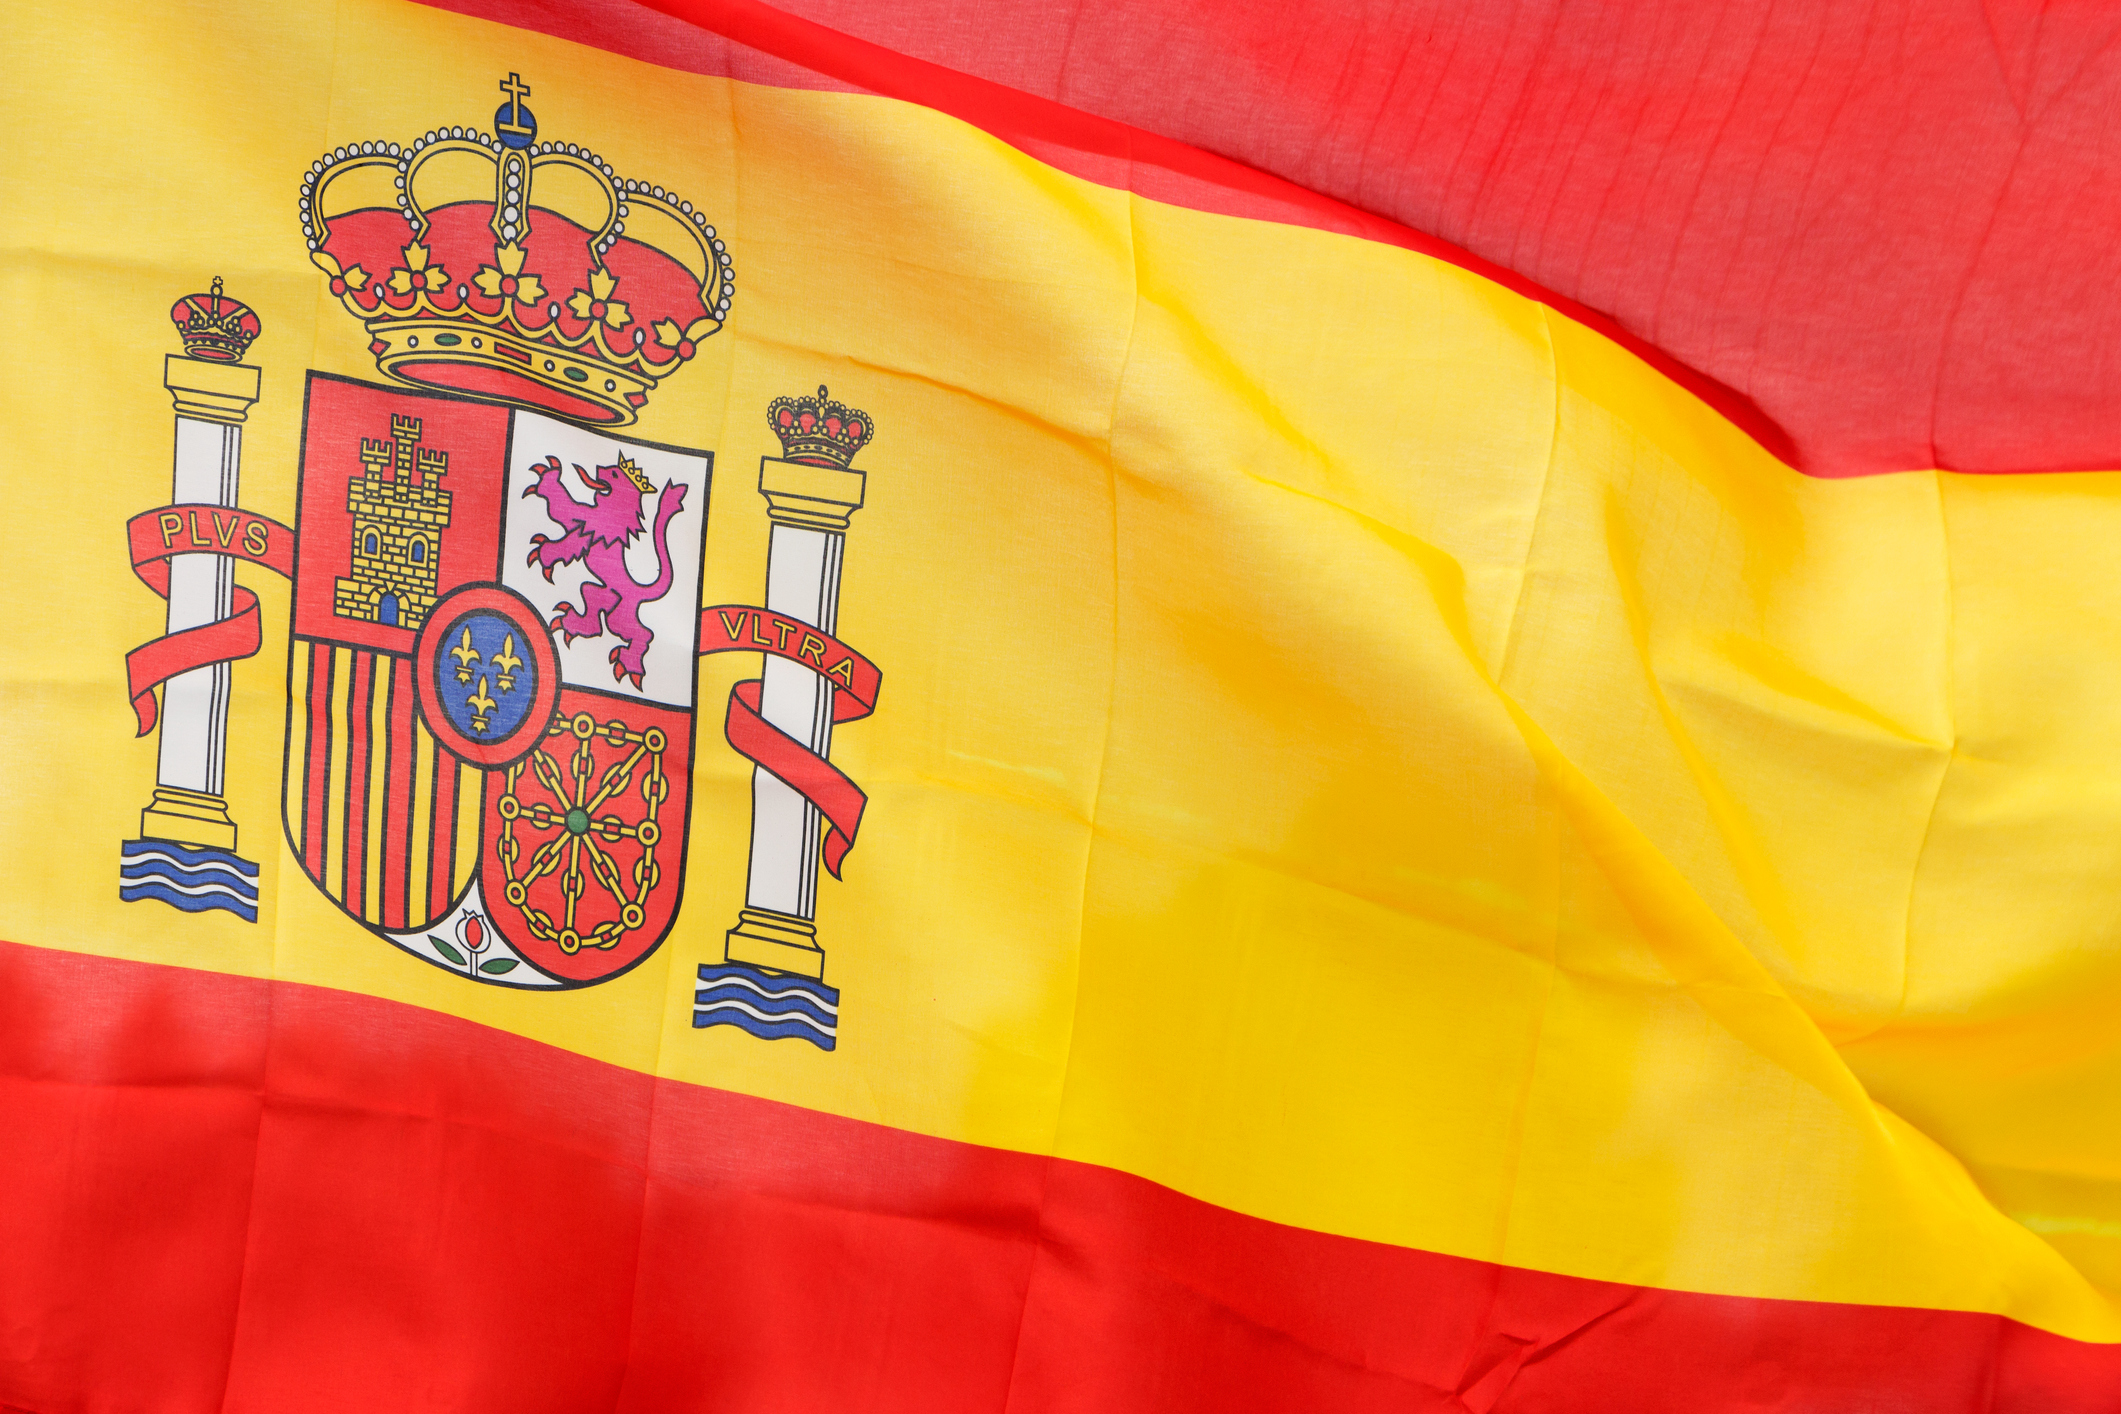 A photo of the Spanish flag.